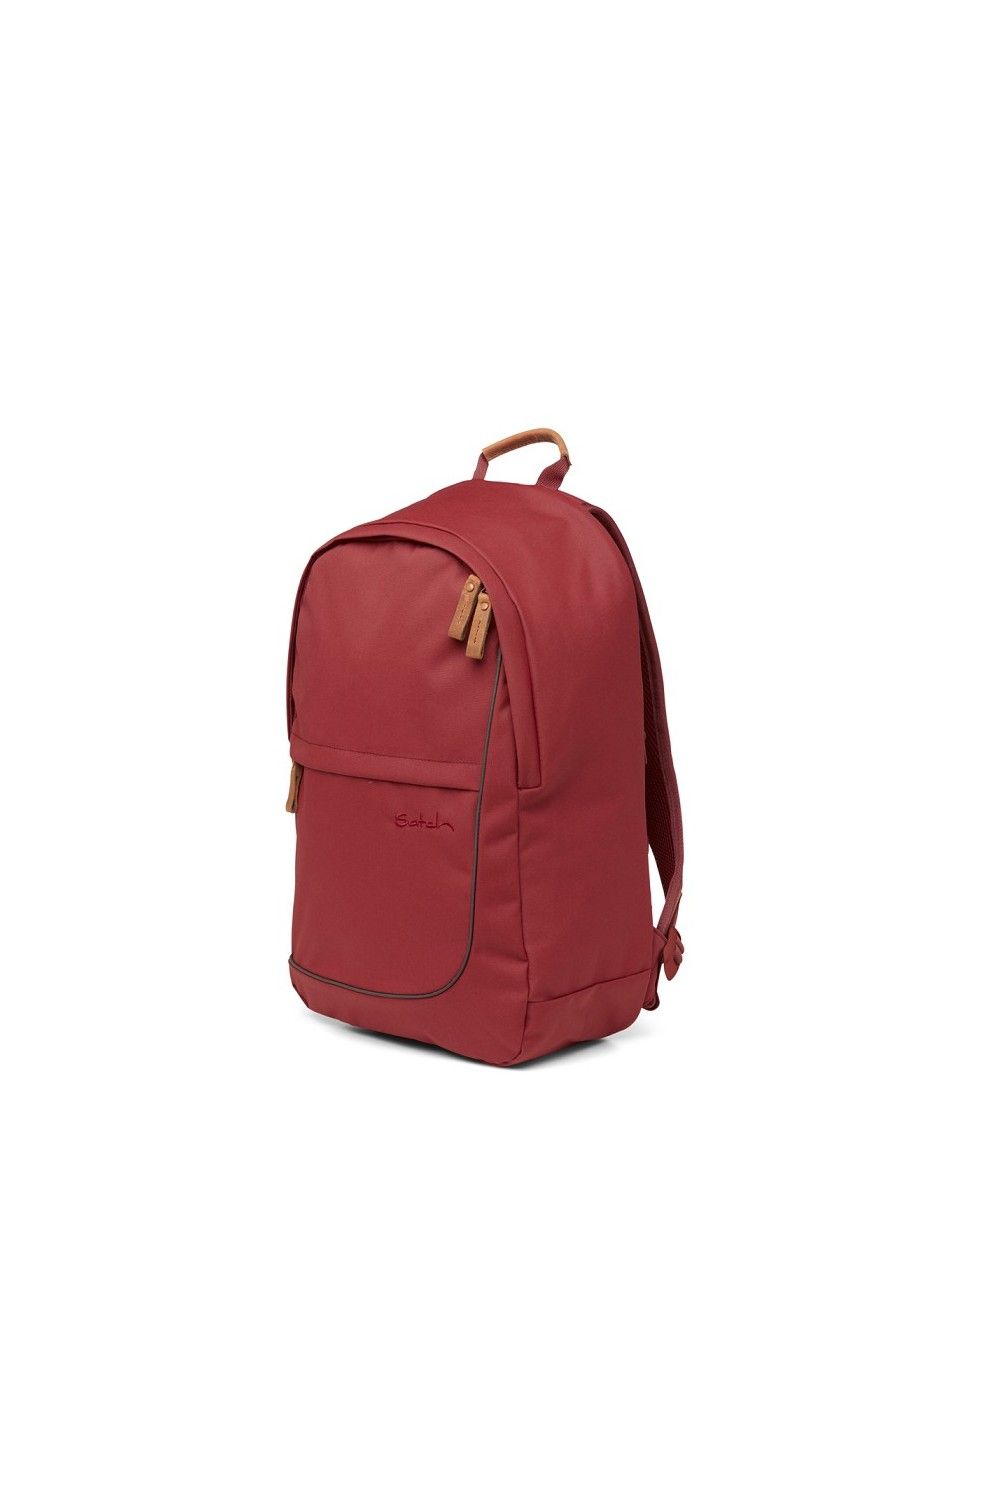 Satch Backpack Fly Nordic Red